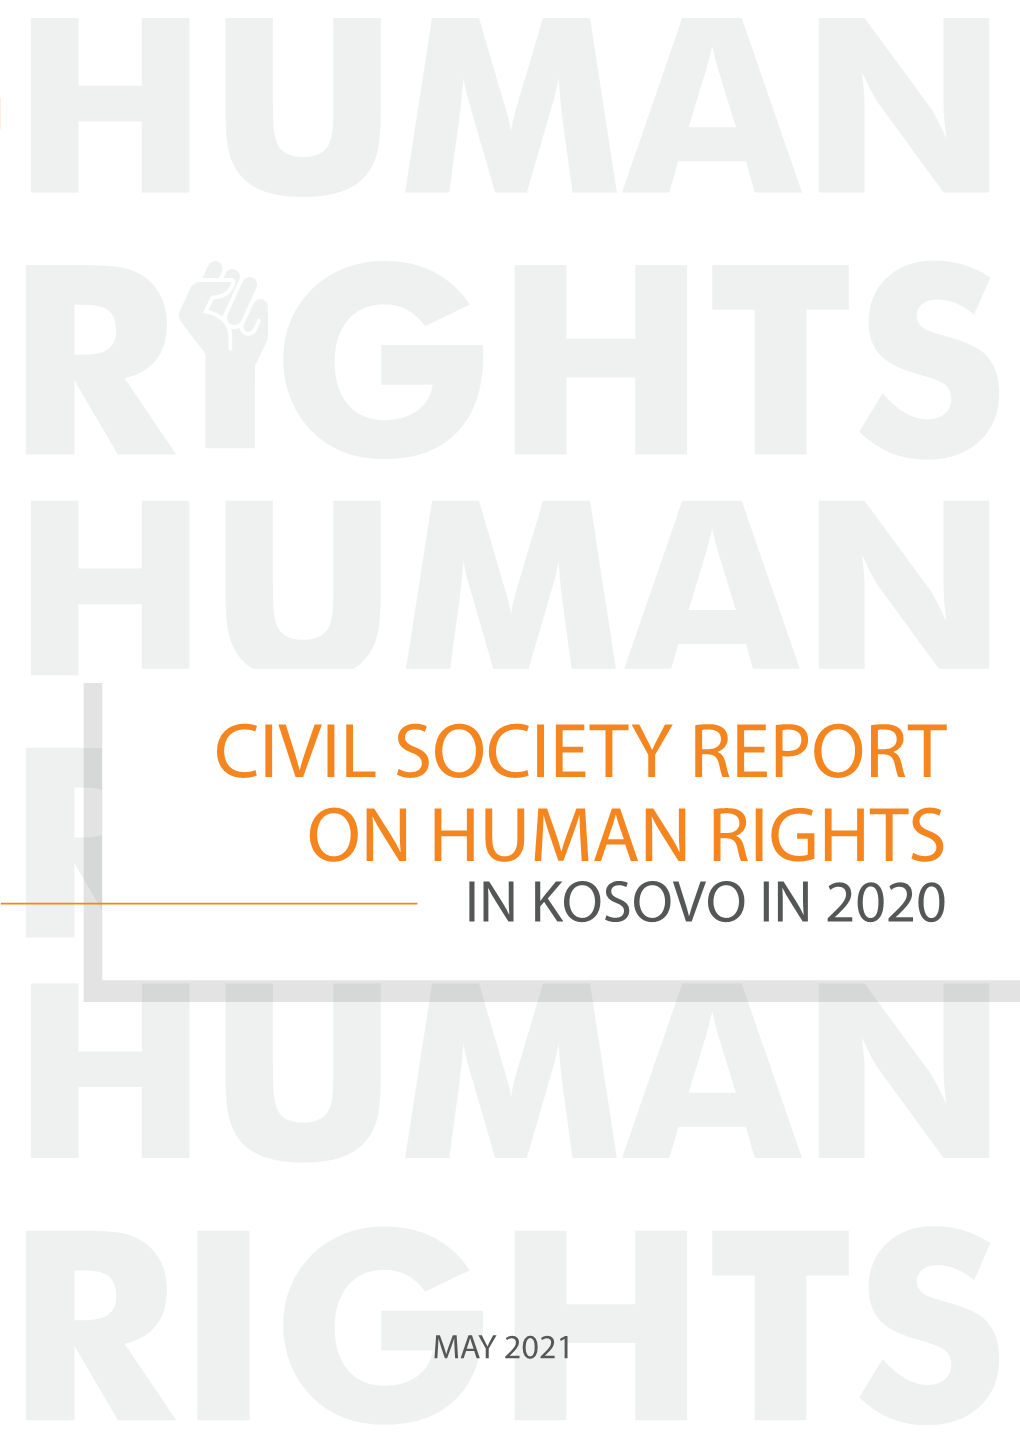 Civil Society Report on Human Rights in Kosovo in 2020